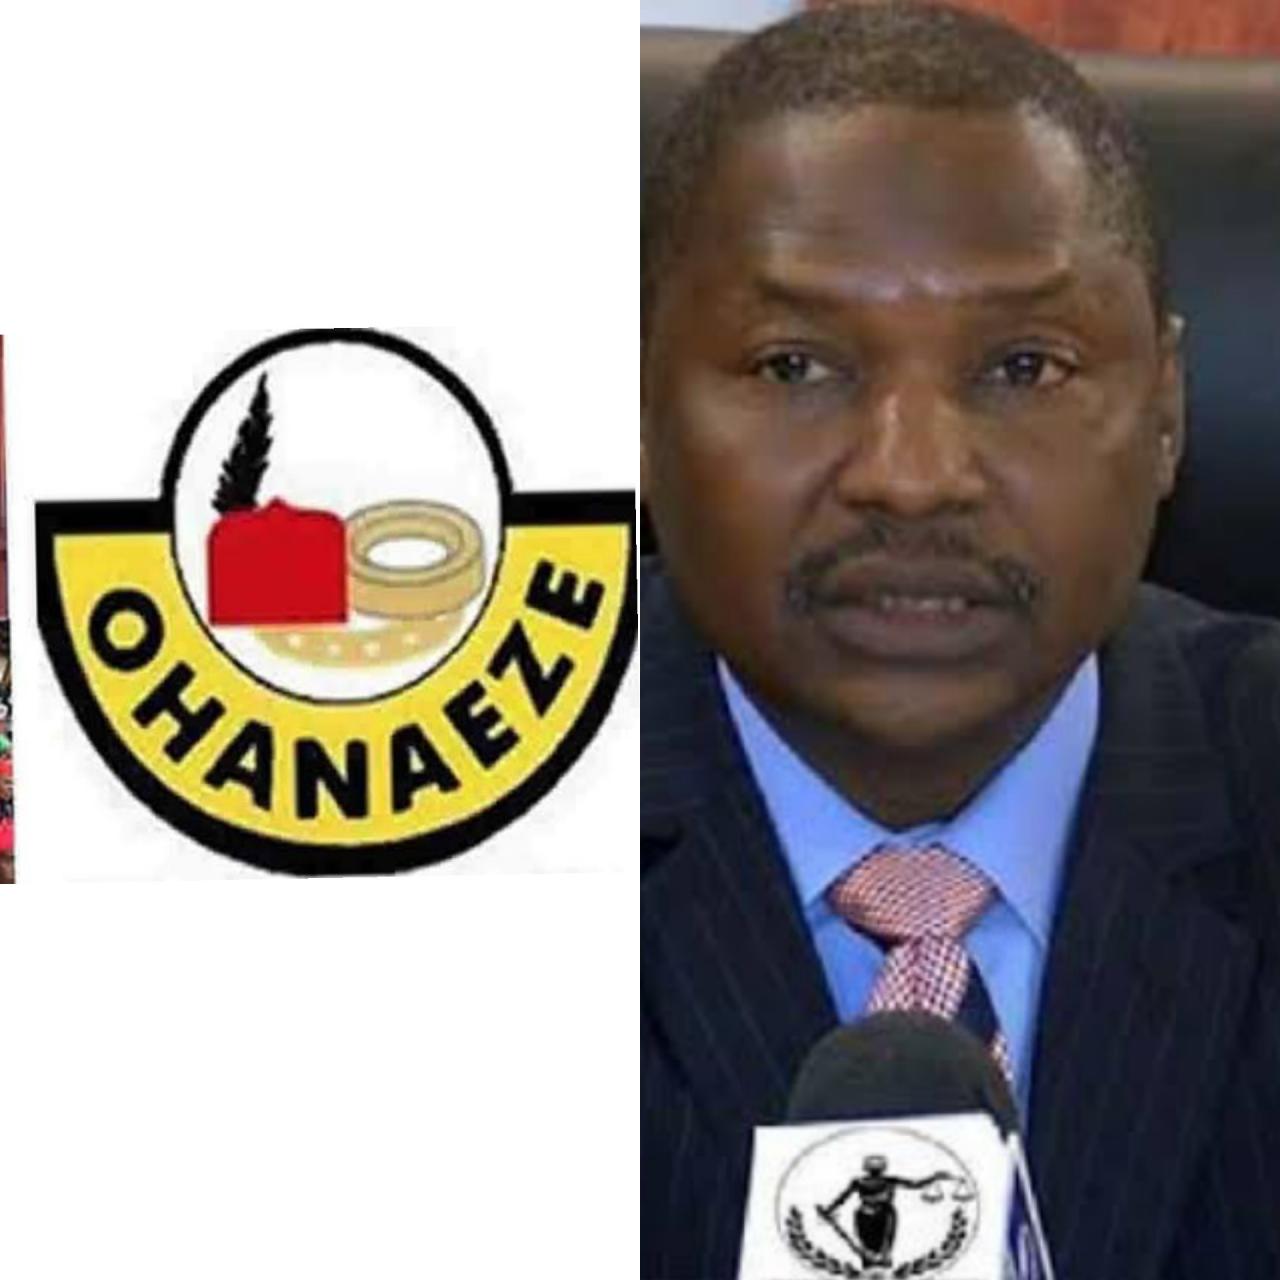 Stop pitting Yoruba against Igbo - Ohanaeze tells AG Malami after he claimed IPOB carried out attack on Oba Akiolu during EndSARS protests